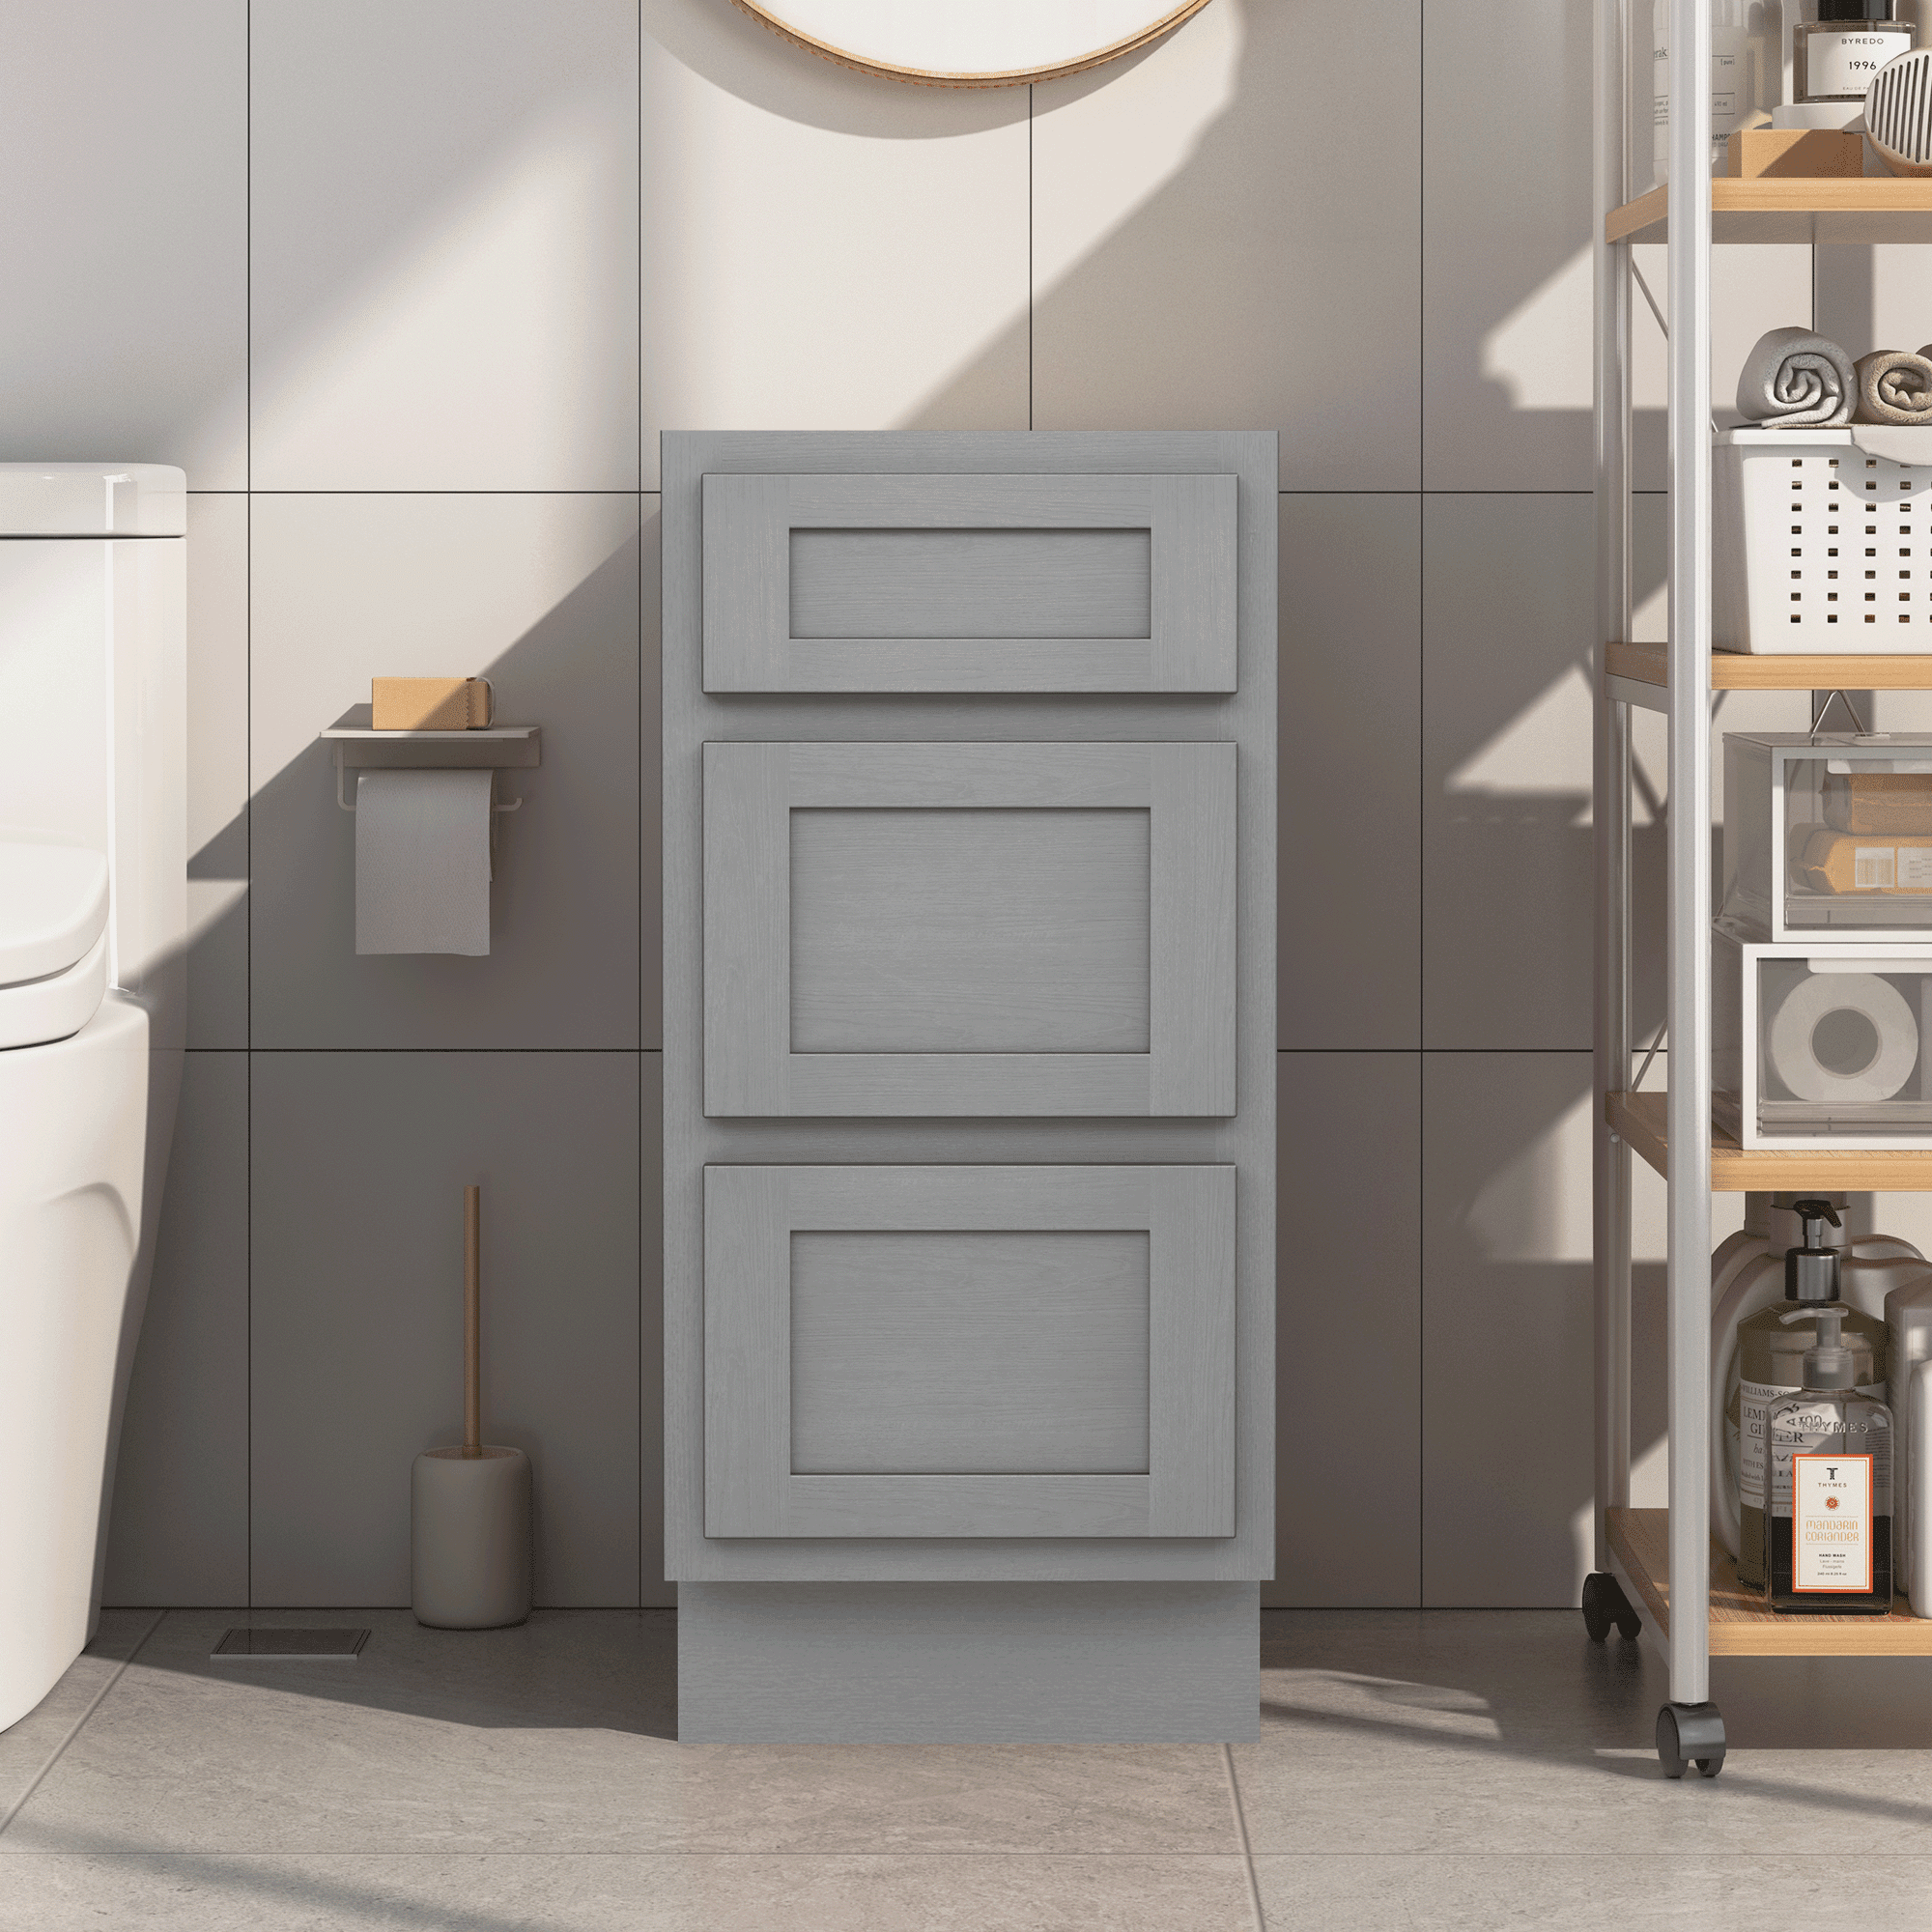 Vanity Art 15 Inch Bathroom Vanity Small Base Cabinet with 3 Soft Closing  Shaker Drawers, Strudy Floor Mount Cabinets for Storage Shaving, Washroom  Accessories, VA4015-3S 